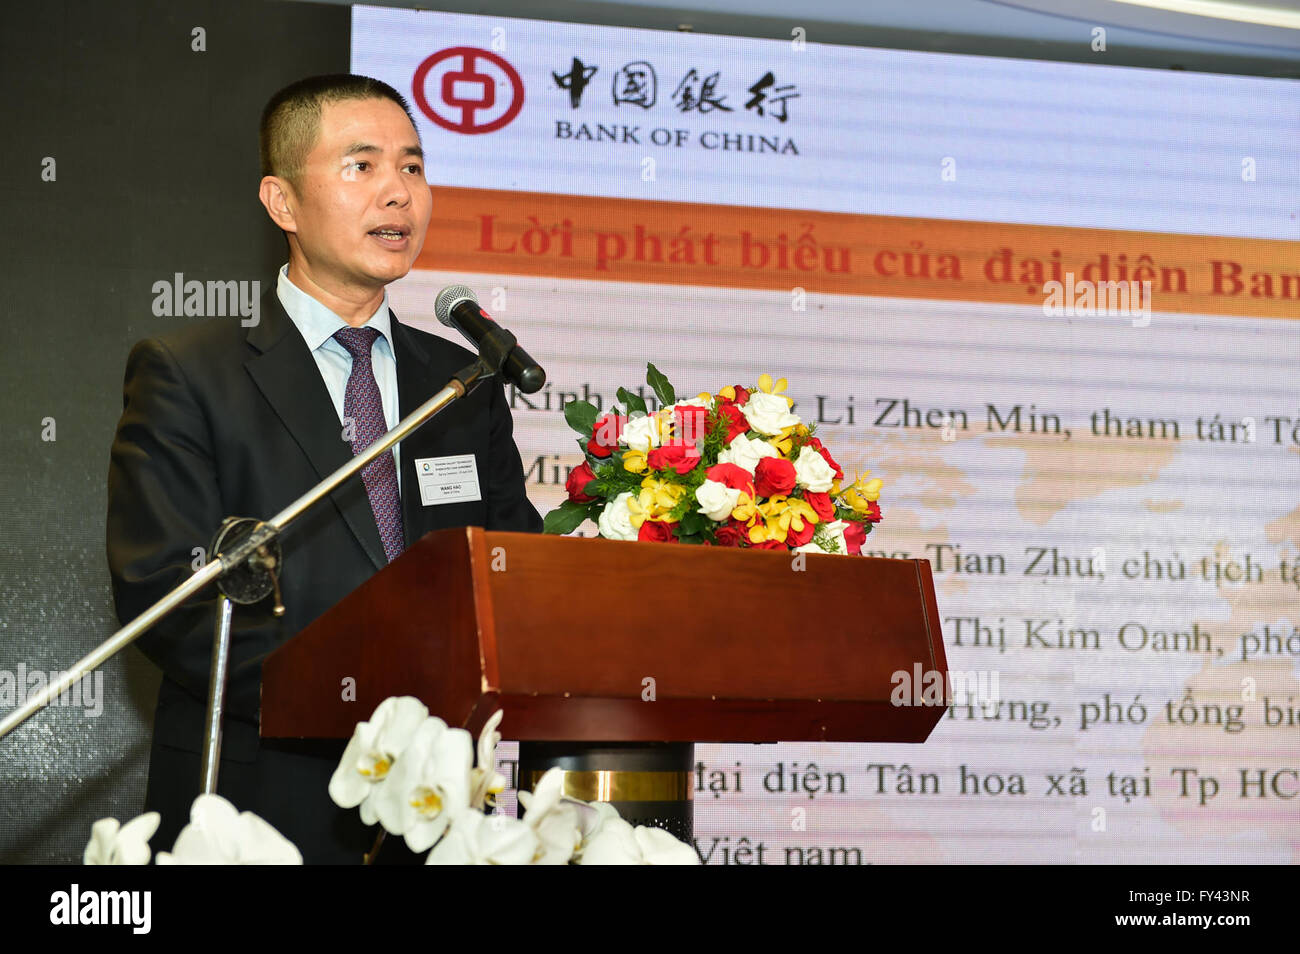 Ho Chi Minh City, Vietnam. 20th Apr, 2016. Director of Bank of China's (BOC) Ho Chi Minh City Branch Wang Hao delivers a speech during the signing ceremony in Ho Chi Minh City, Vietnam, on April 20, 2016. BOC's Ho Chi Minh City Branch signed here Wednesday a 103-million U.S. dollar syndicated loan for a Vietnam-based subsidiary of leading Chinese yarn manufacturer Texhong Textile Group, partly helping foster the good investment and trade relations between the two countries. © Nguyen Le Huyen/Xinhua/Alamy Live News Stock Photo